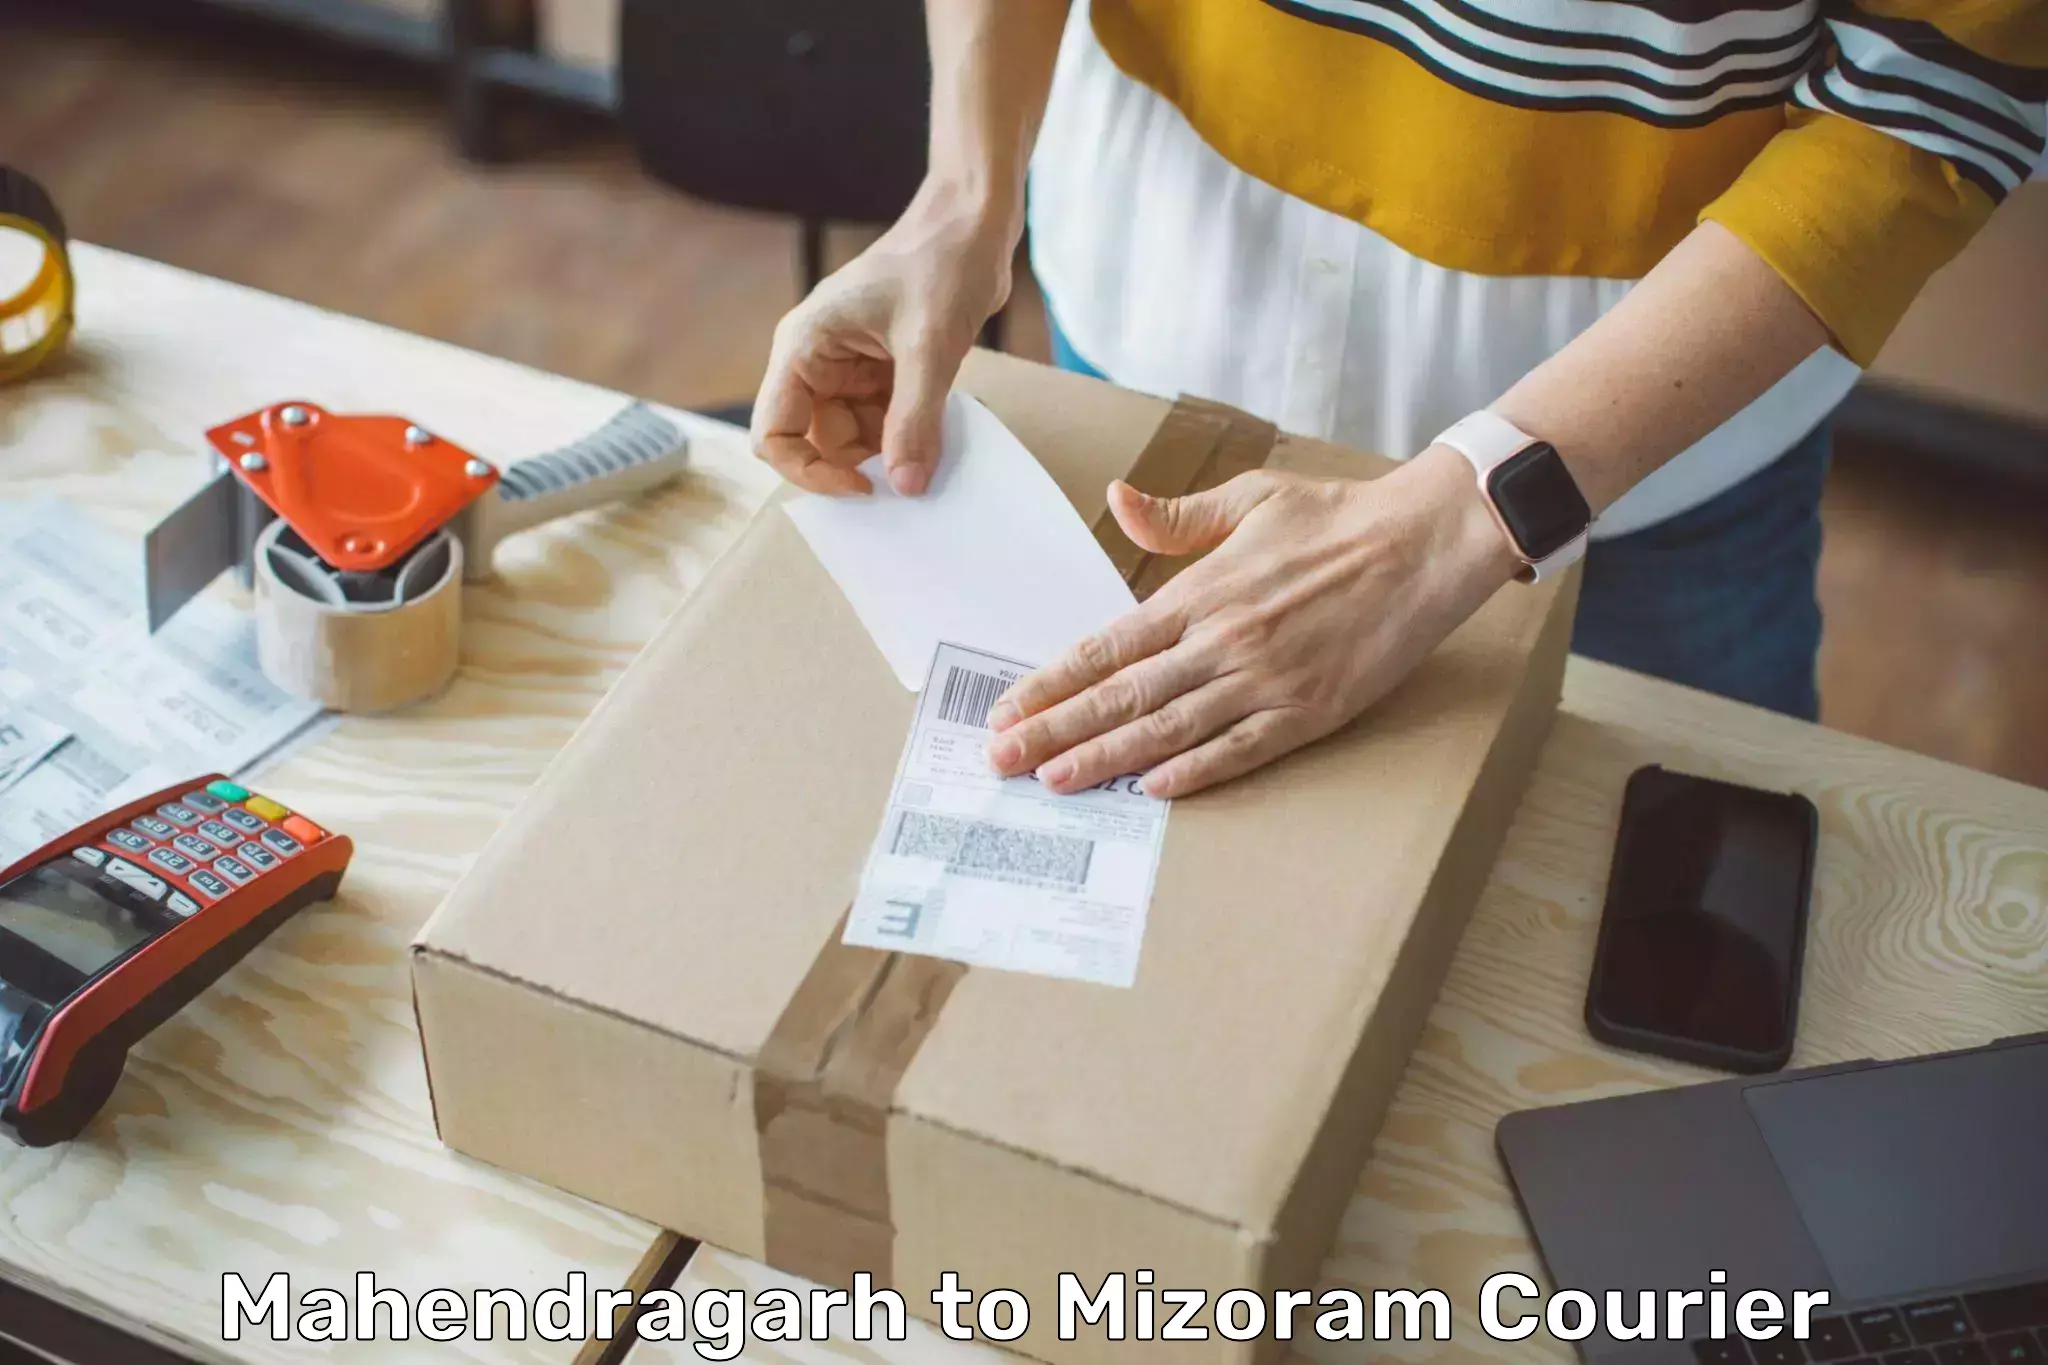 Next-day delivery options Mahendragarh to Mizoram